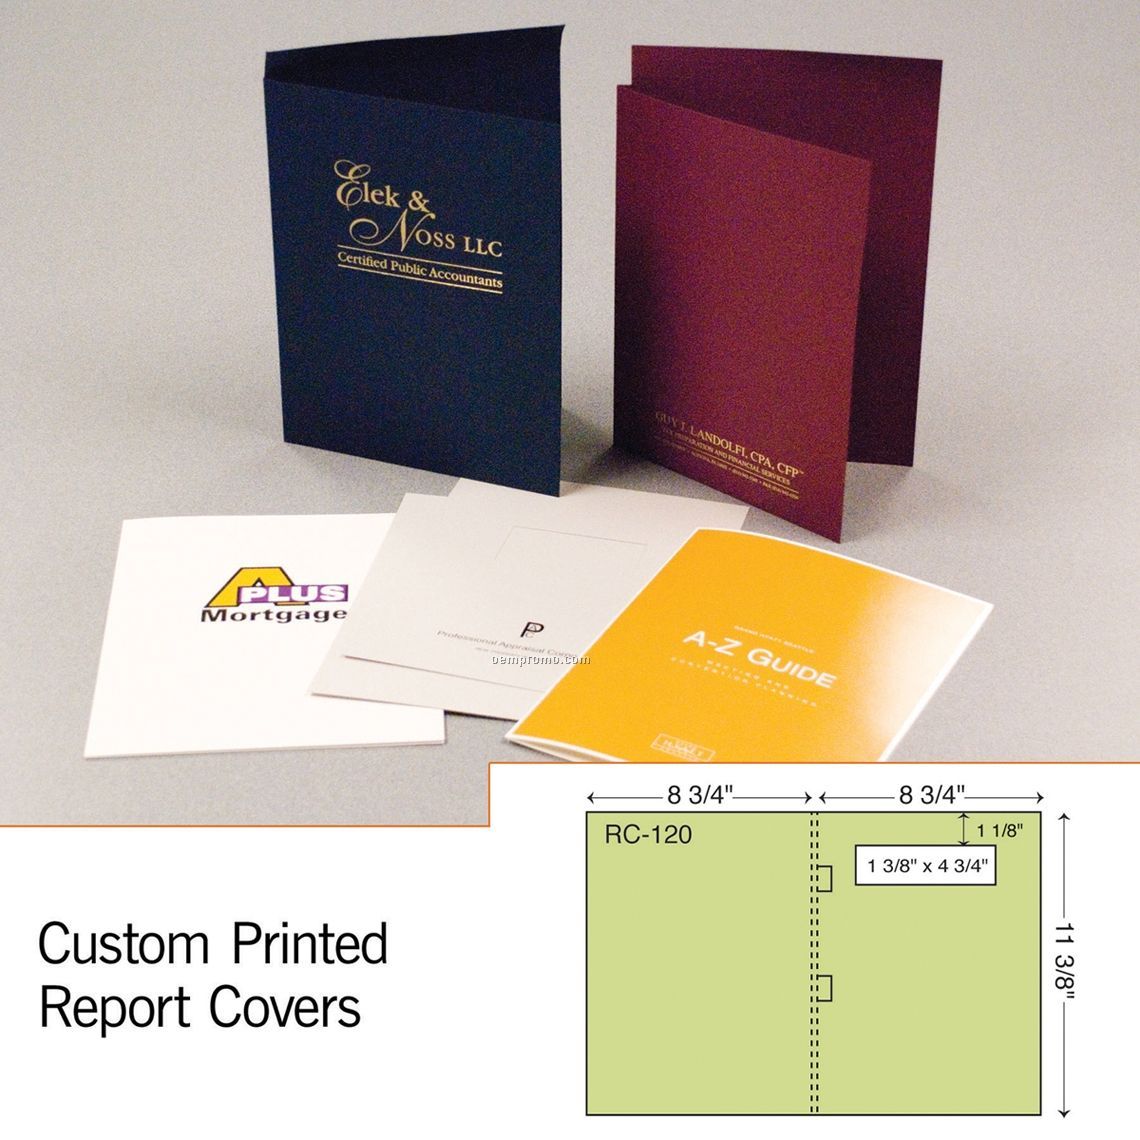 1 Part Report Cover W/ 1/8" Spine (1 Color/1 Side)